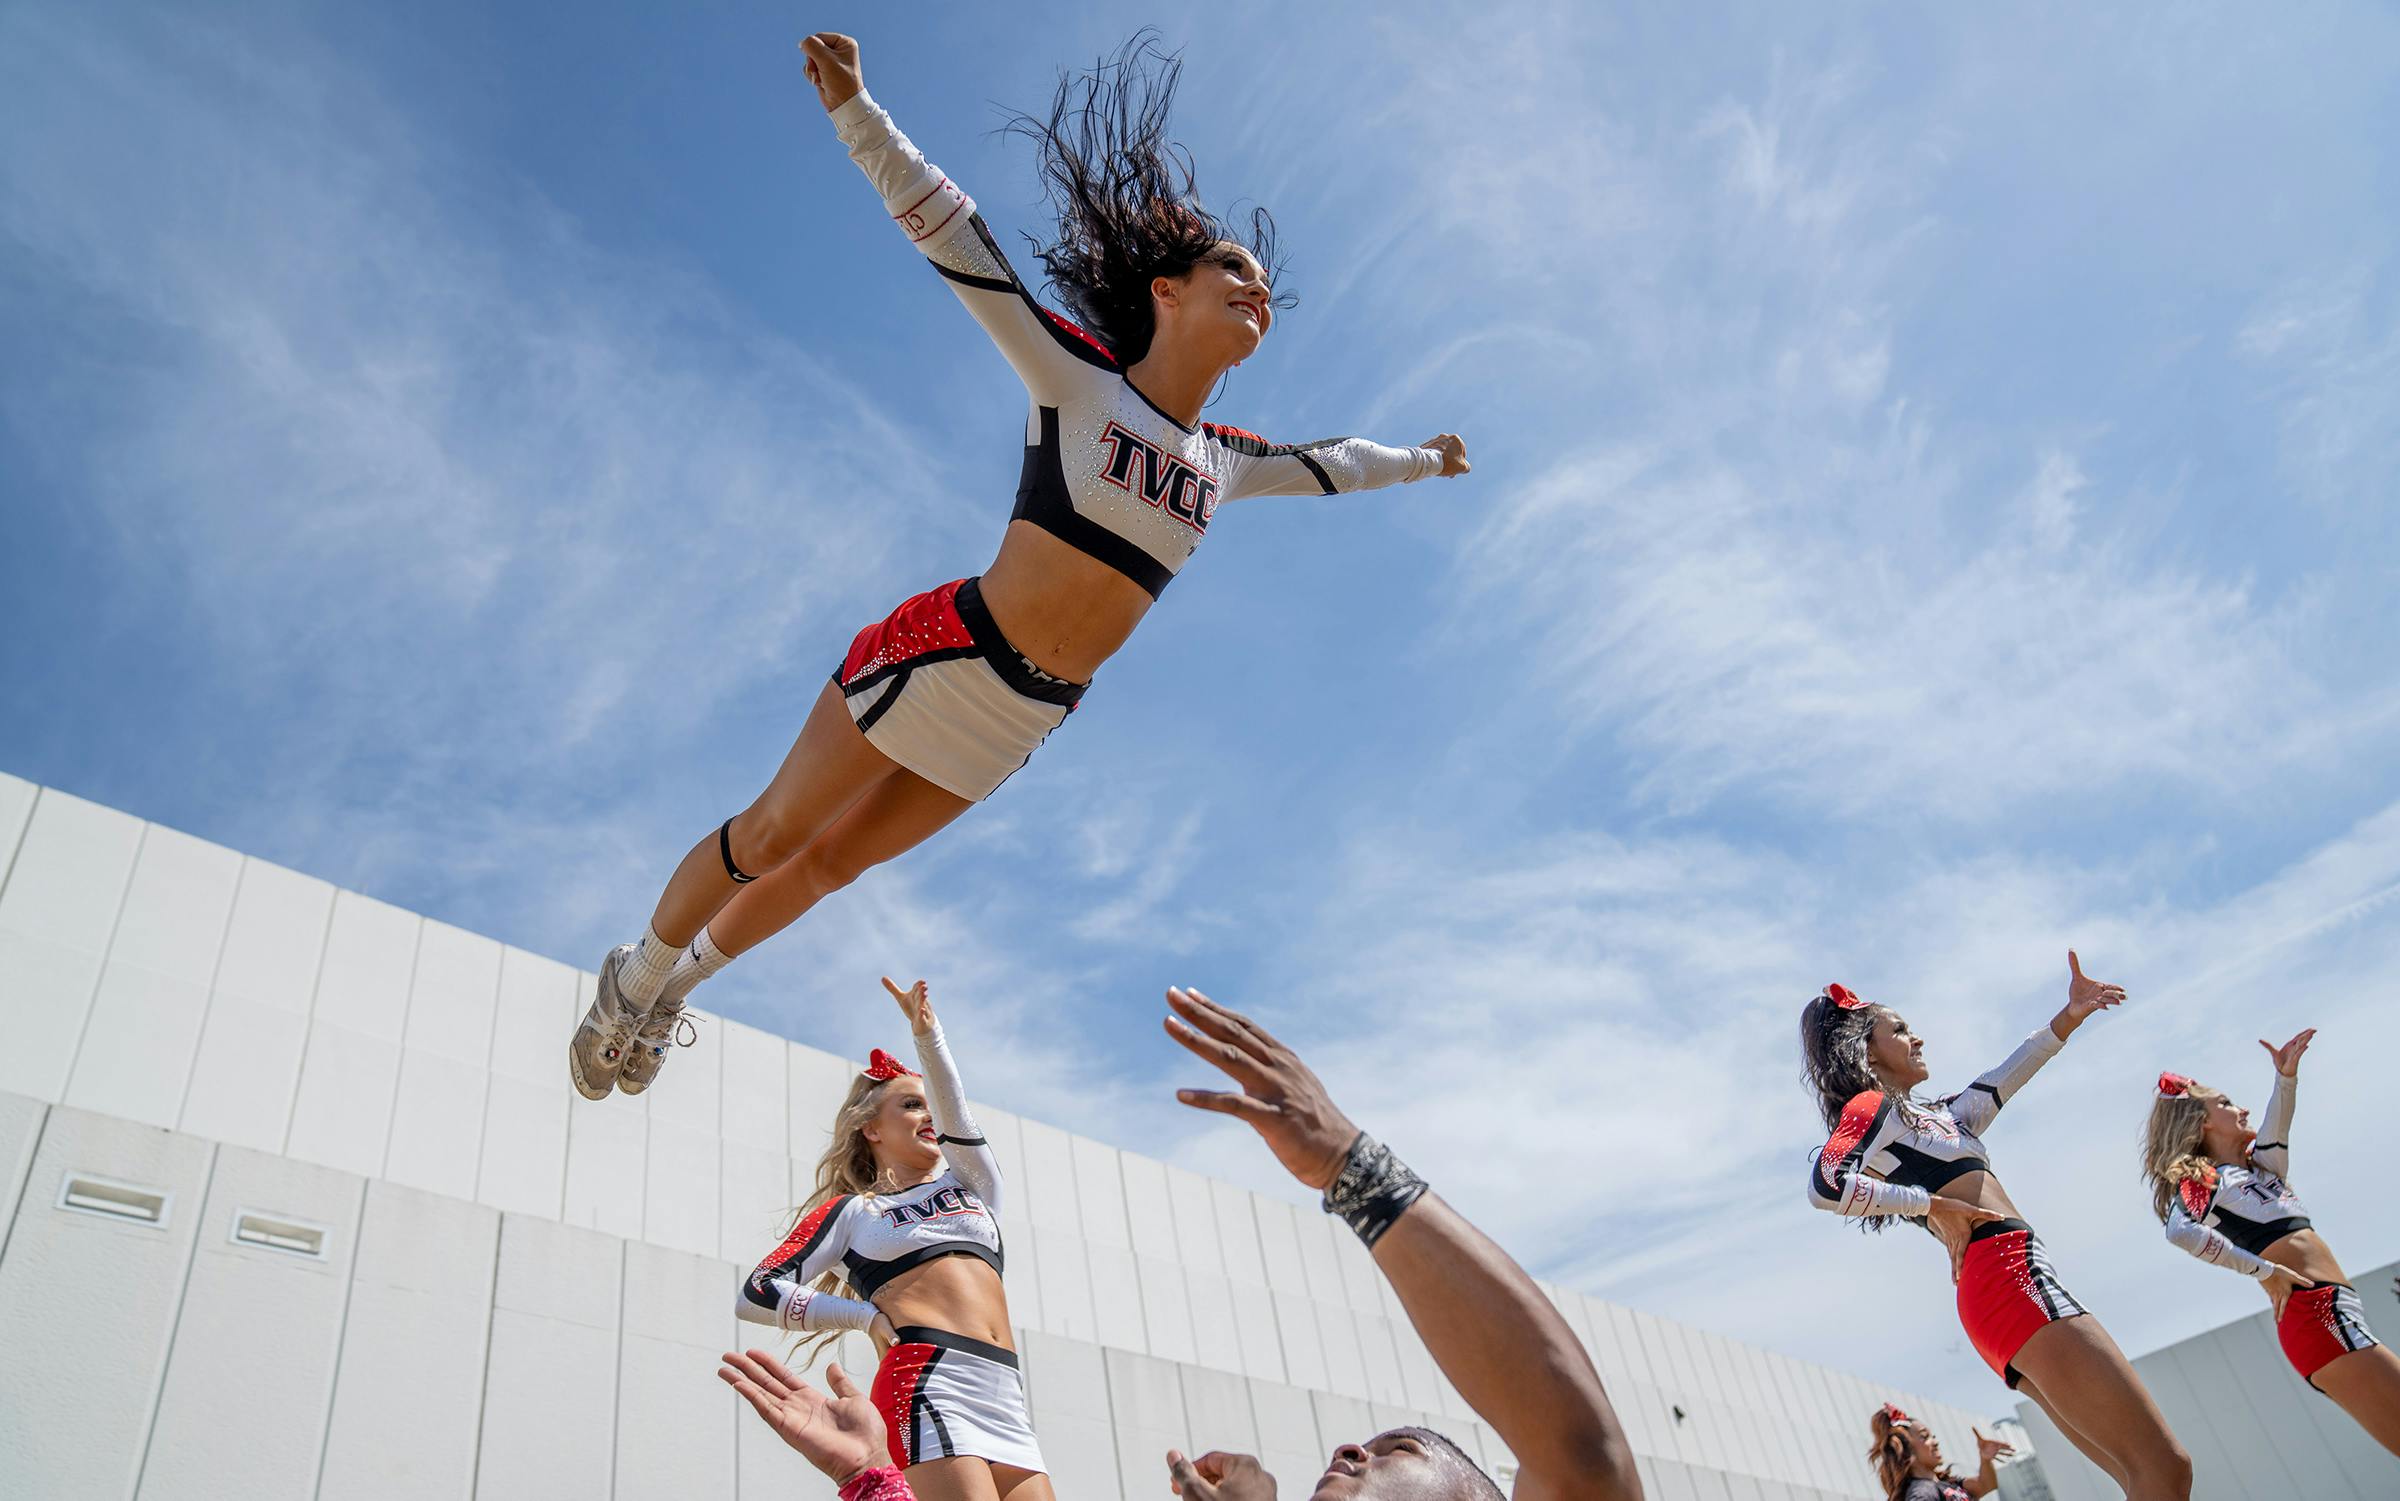 https://img.texasmonthly.com/2022/01/cheer-season-2-tvcc.jpg?auto=compress&crop=faces&fit=fit&fm=pjpg&ixlib=php-3.3.1&q=45